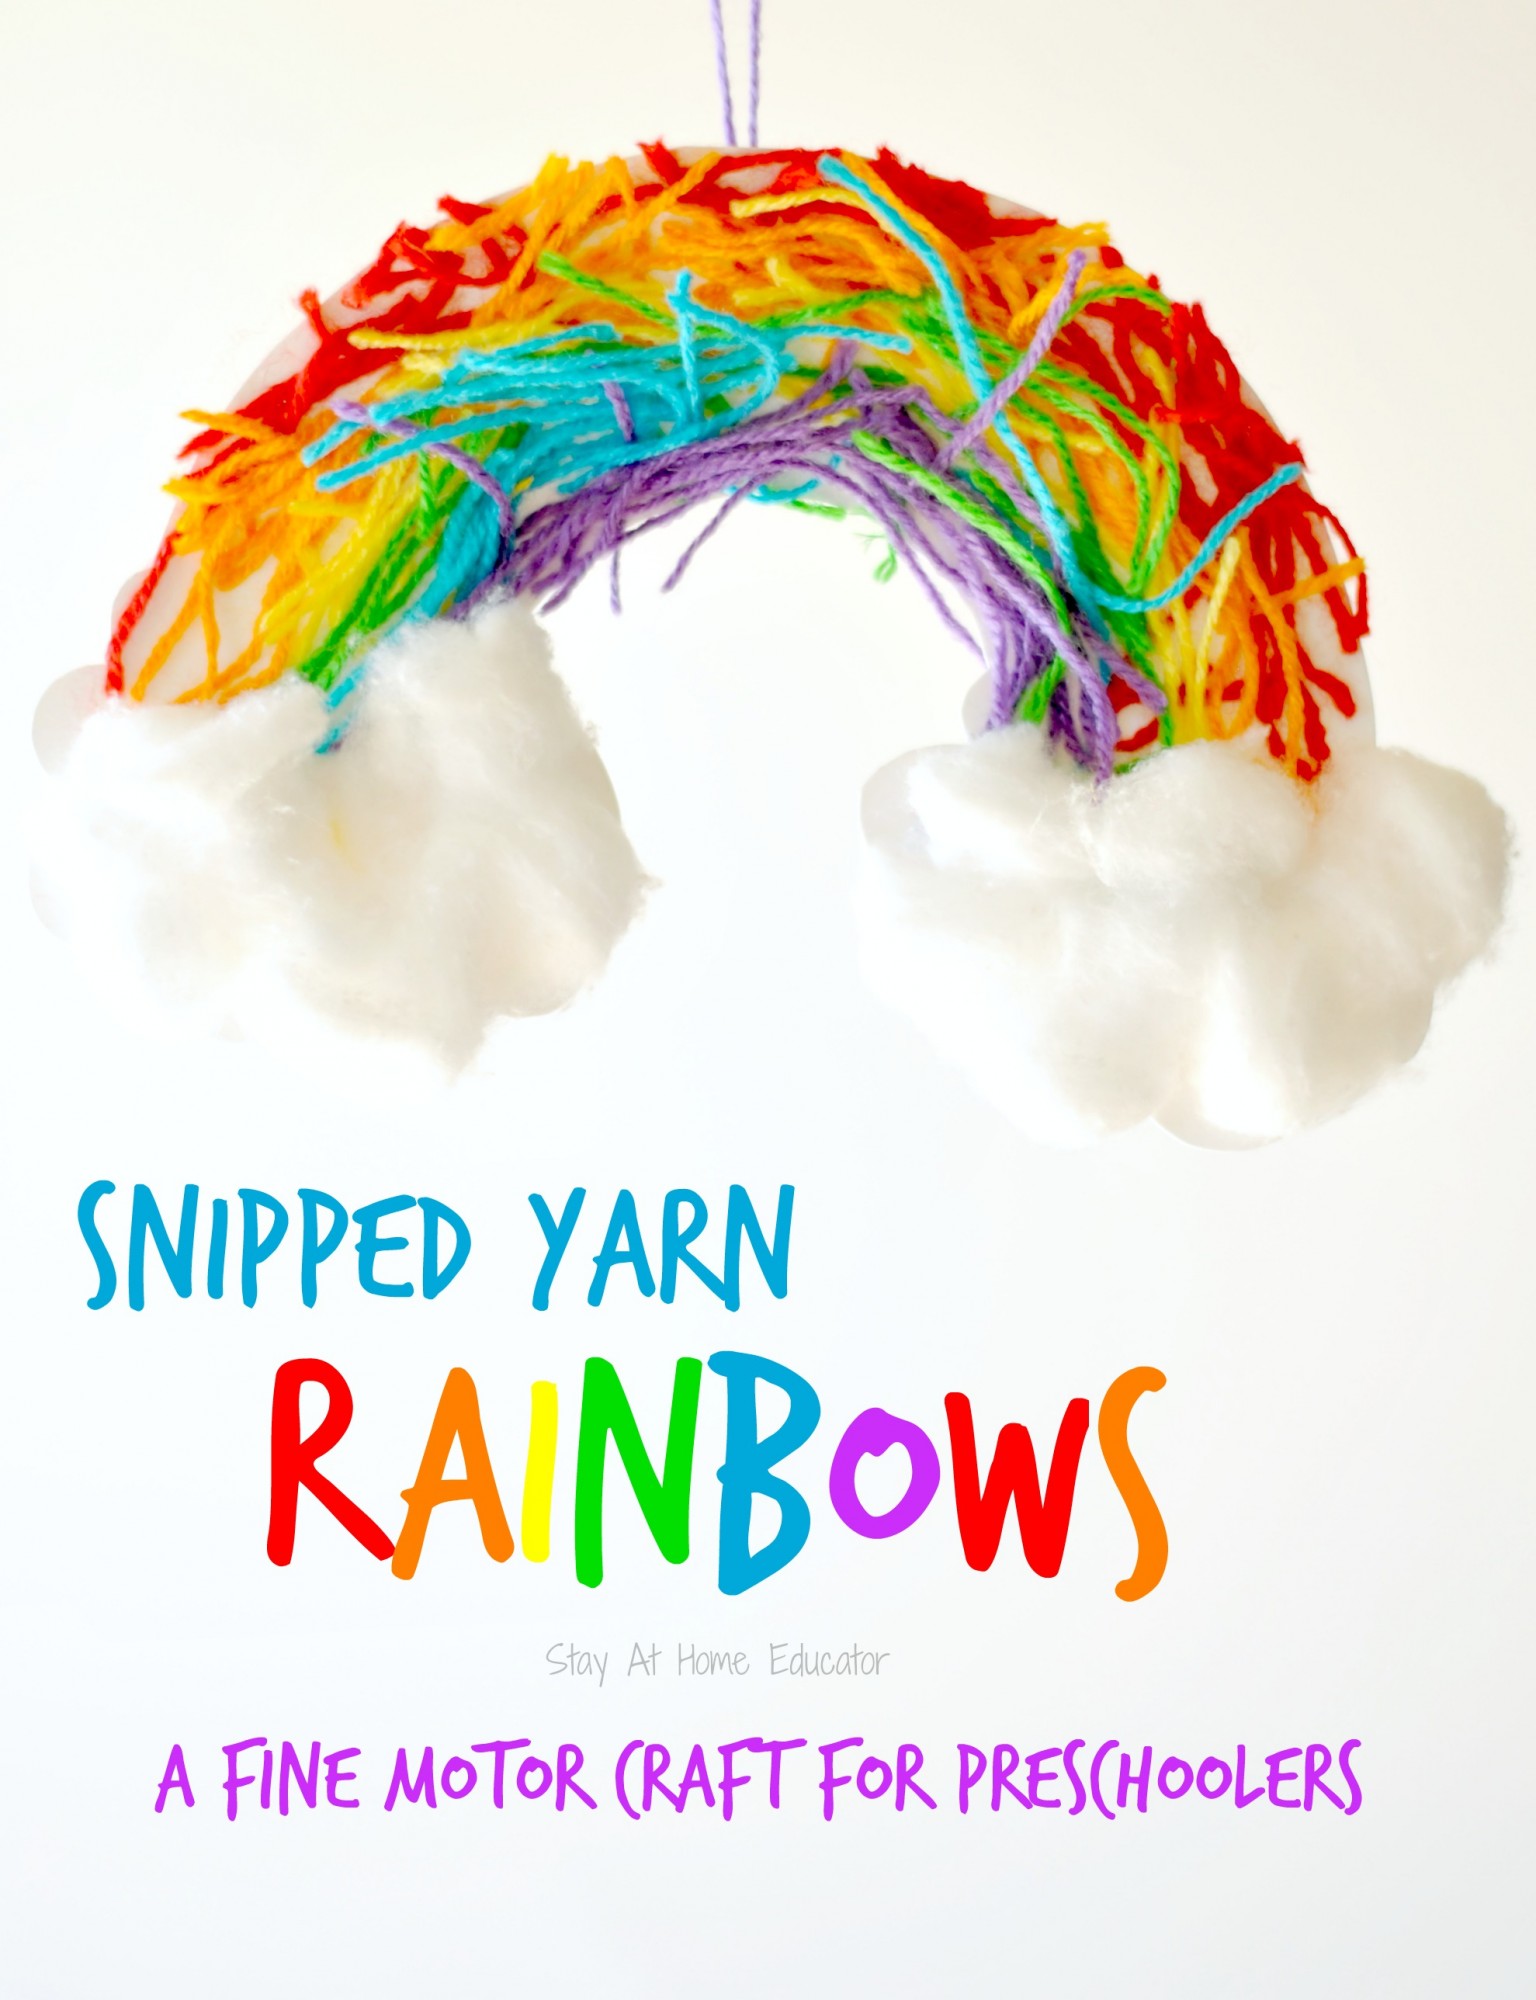 Snipped yarn rainbows, a fine motor craft for preschoolers  - work on hand strength, fine motor skills, and scissor cutting practice while doing a rainbow craft for preschoolers. Add it to your st. Patrick's Day lesson plans